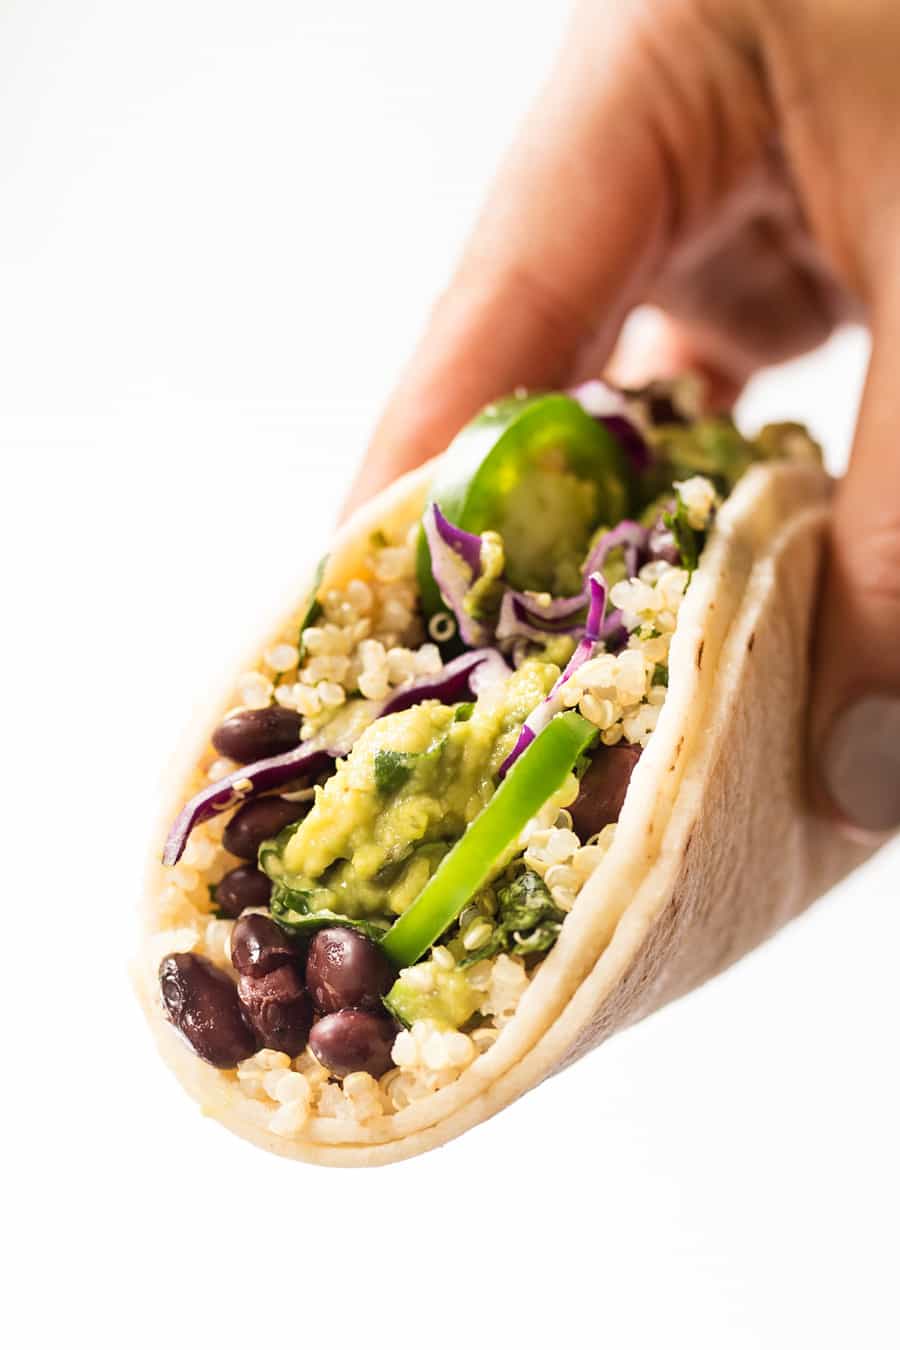 These healthy Cilantro Lime Black Bean Quinoa Tacos are the PERFECT recipe for summer! Light, flavorful, healthy and super SIMPLE! [vegan]